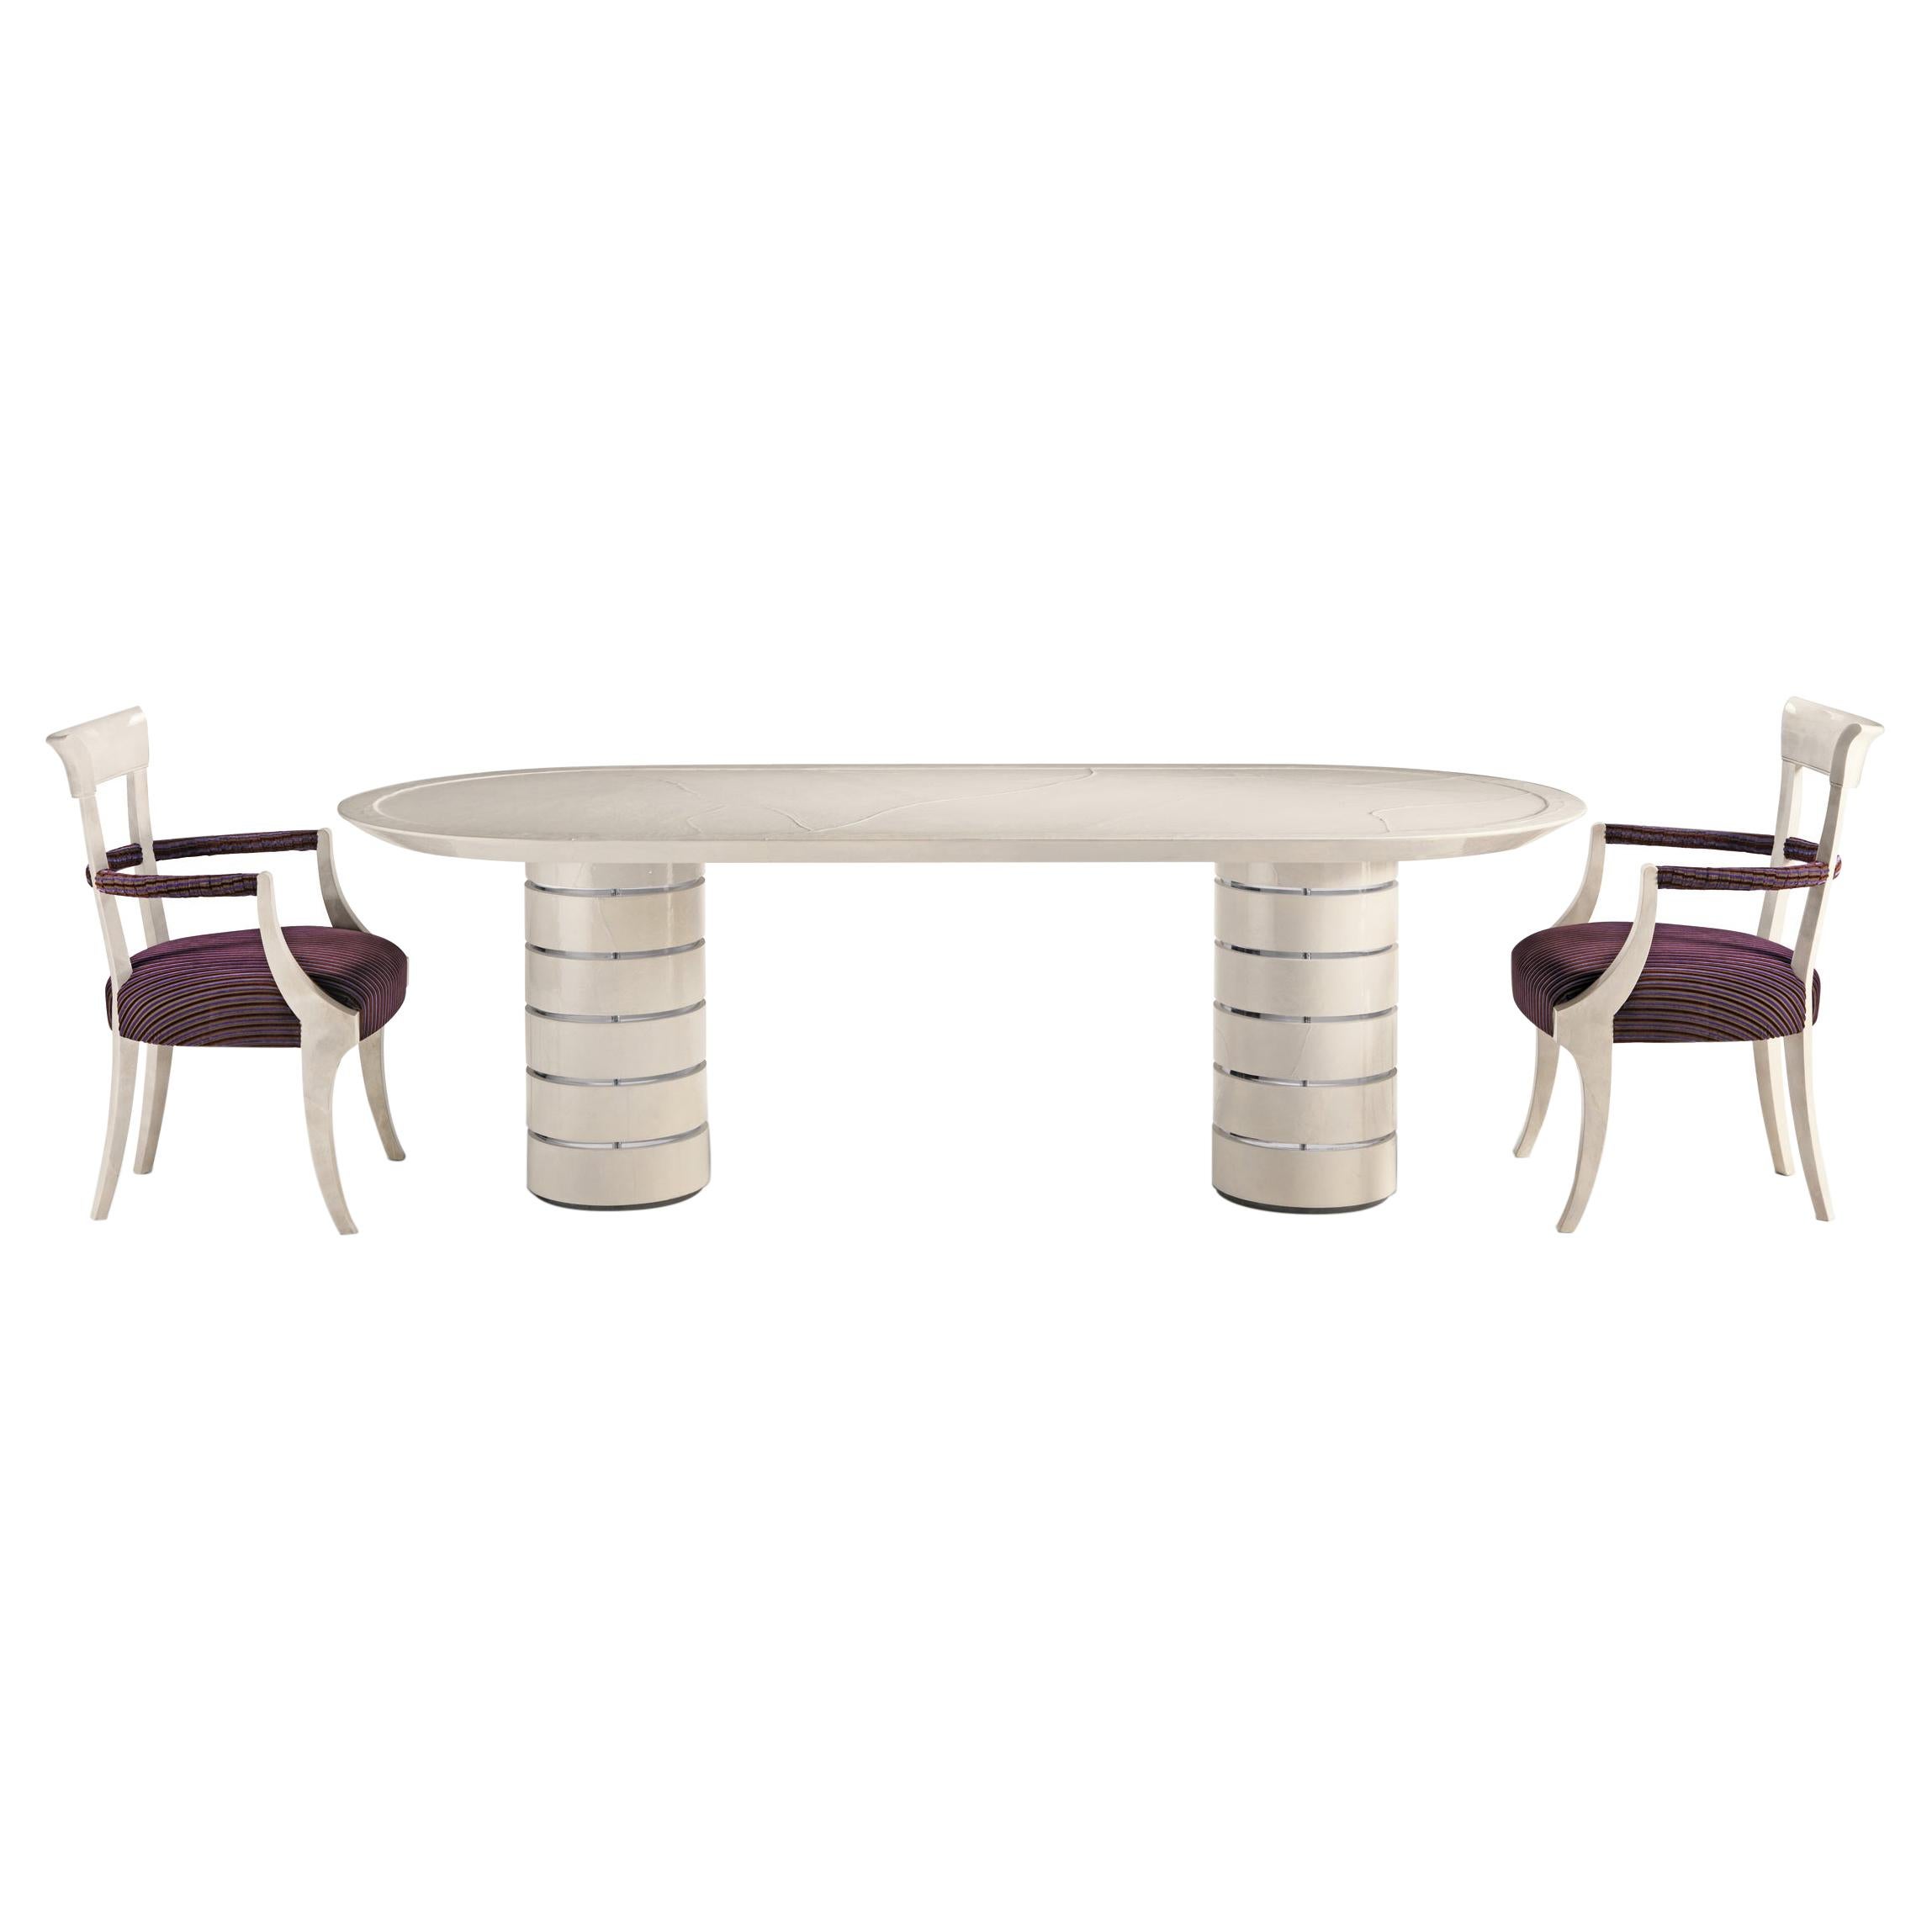 BLADE/T Oval White Dining Table with Plexiglas inserts and Concentric Circles For Sale